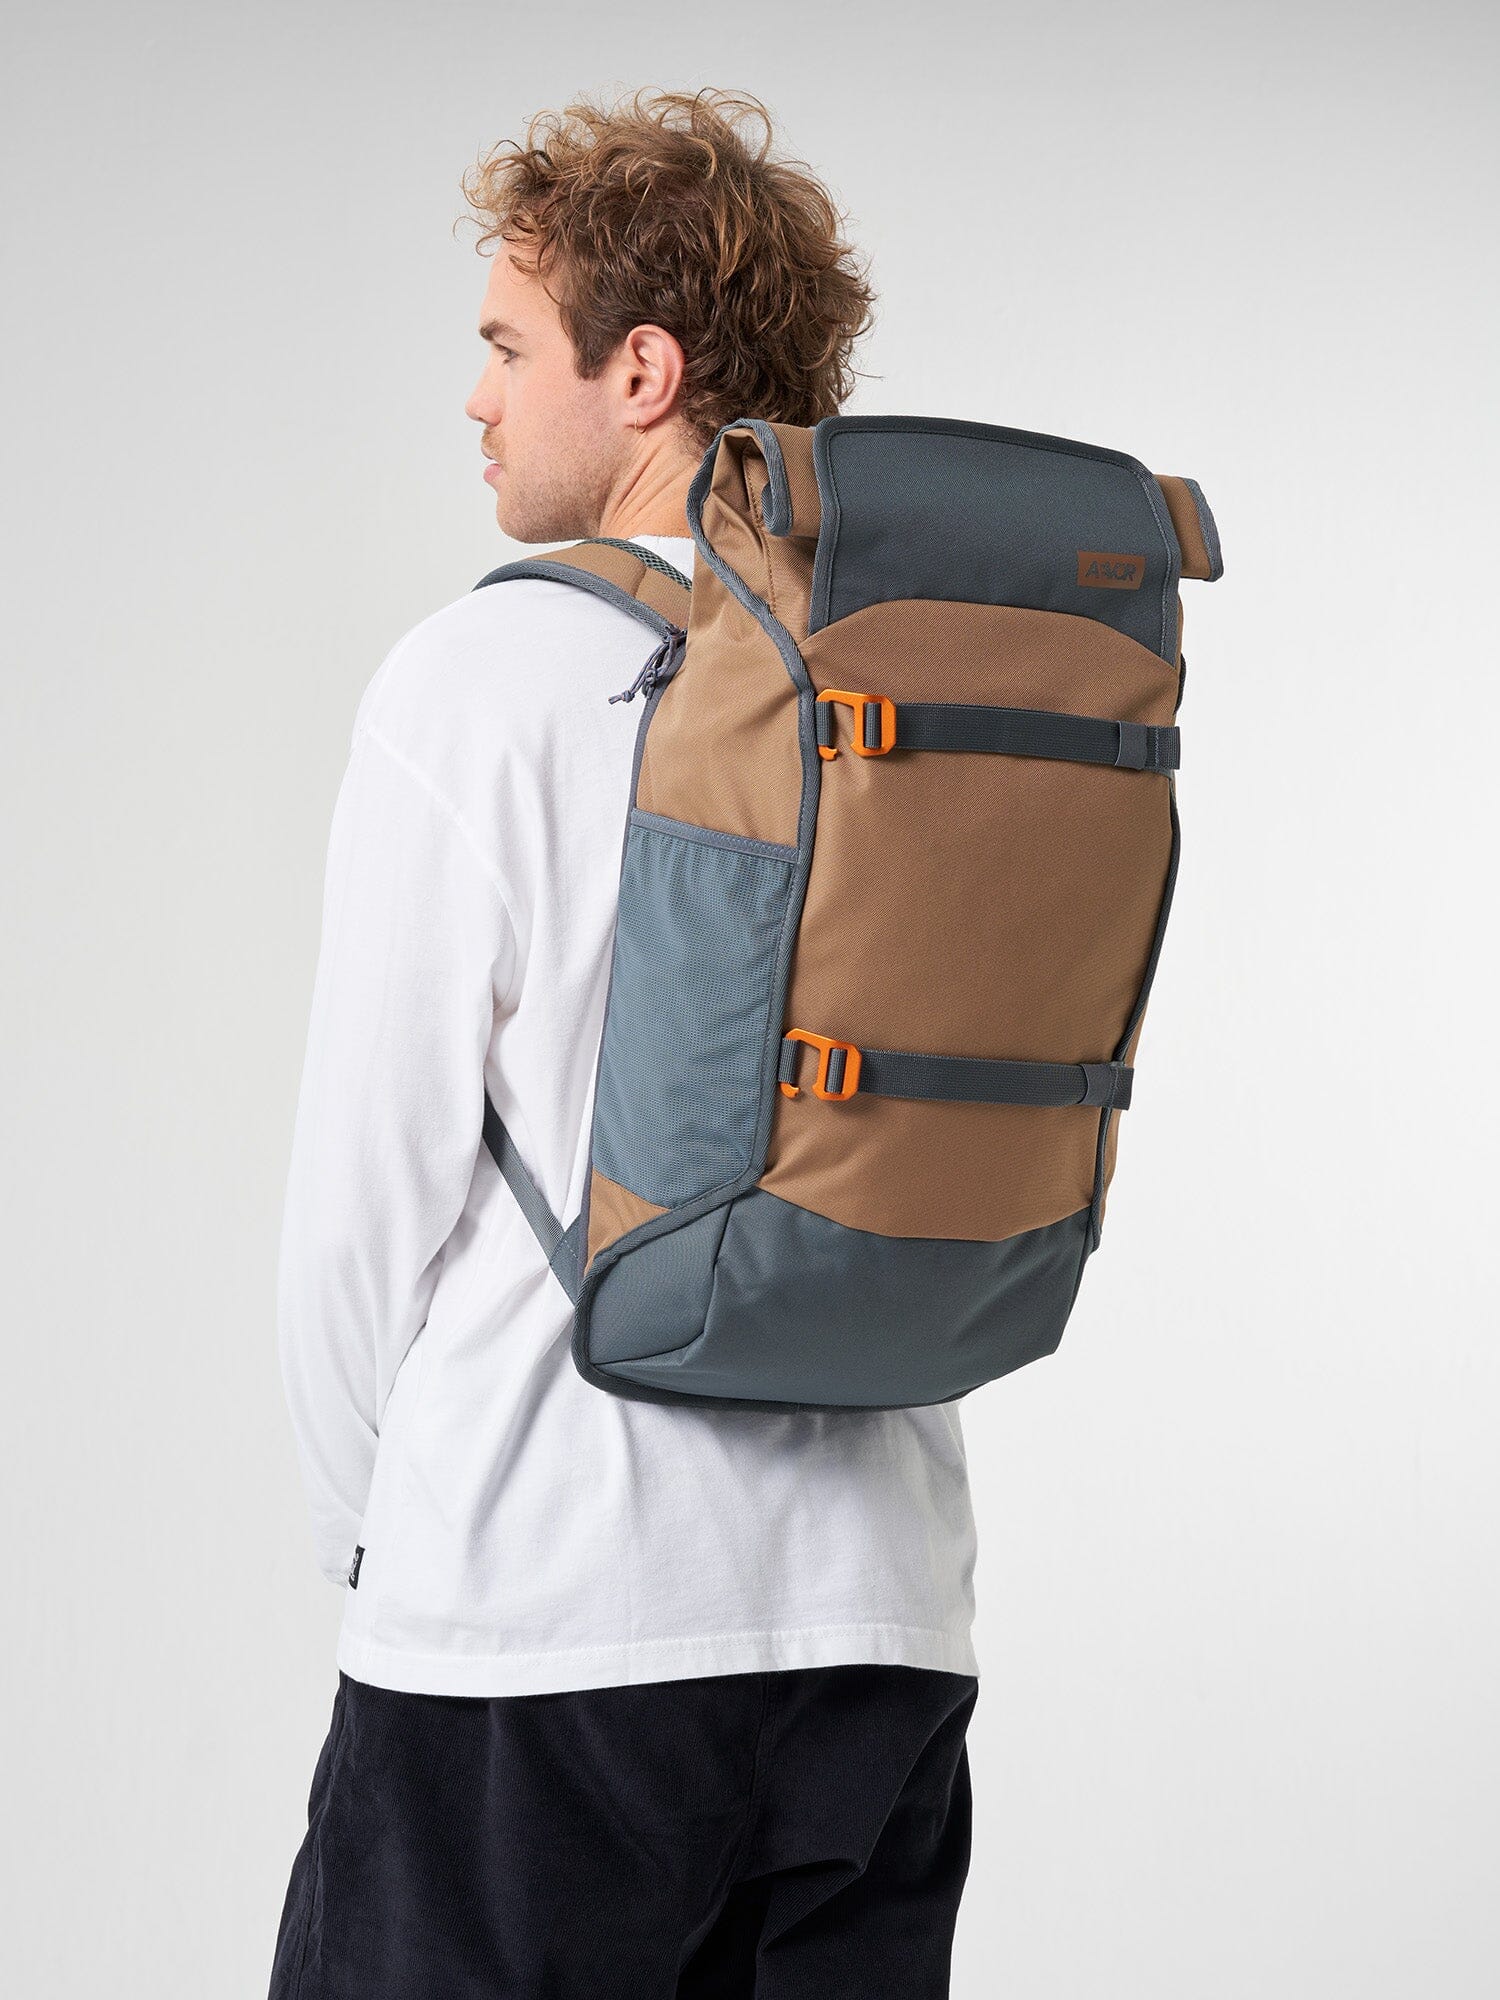 Aevor Trip Pack Backpack - Made from recycled PET-bottles California Hike Bags